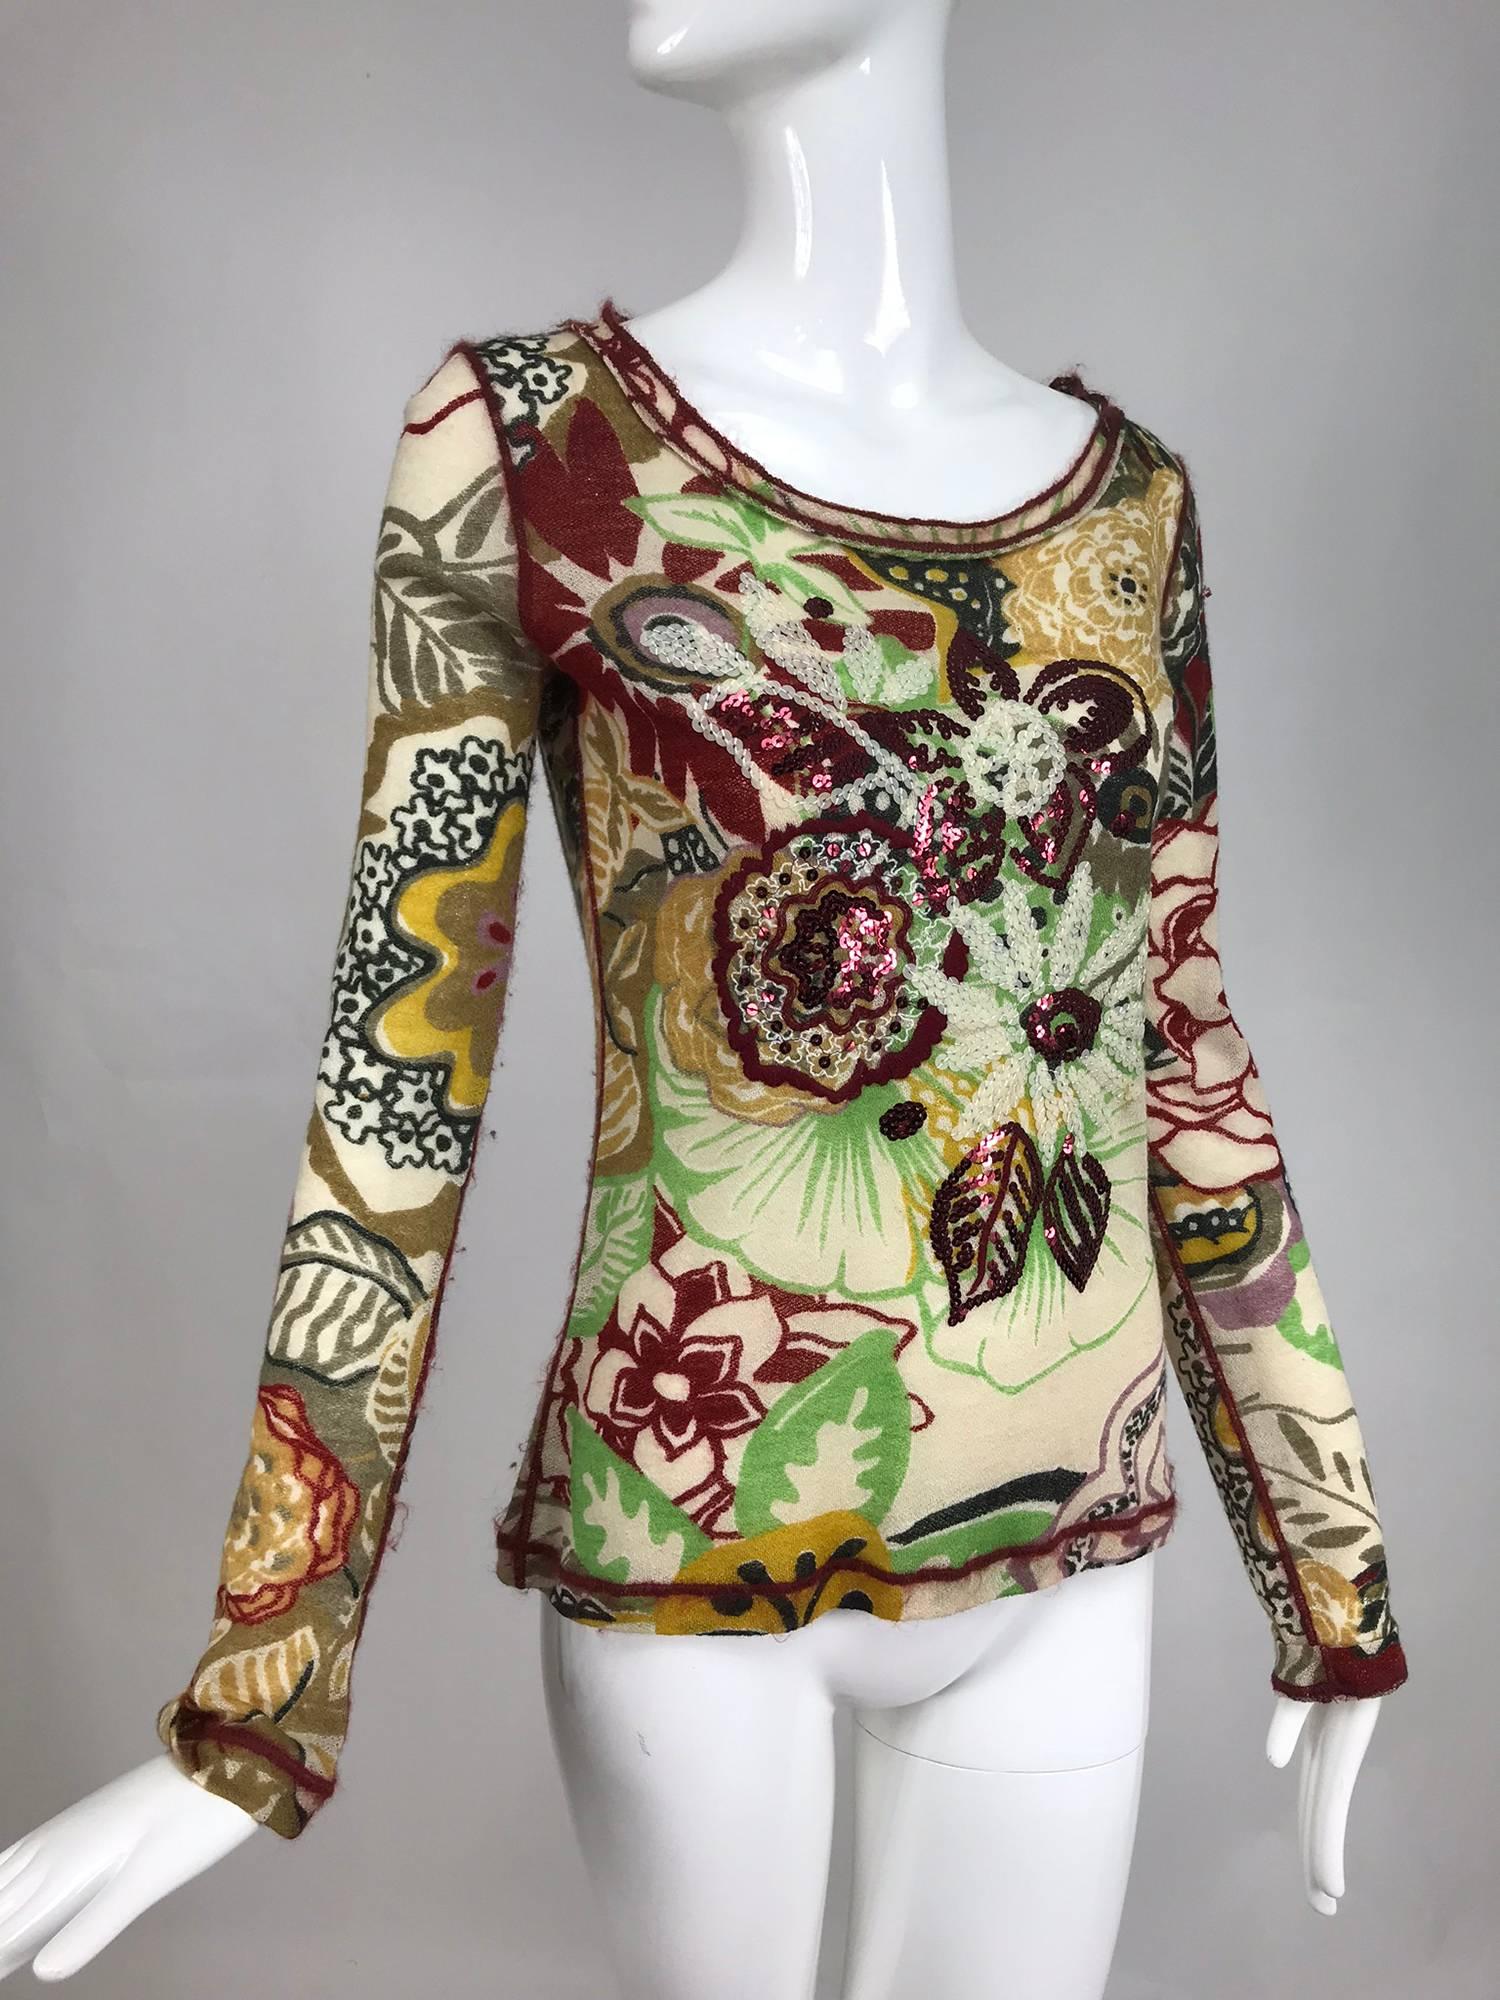 Jean Paul Gaultier Fuzzi sequin floral light lacy wool knit sweater. Pull on sheer sweater with a floral print that is over embroidered with sequins. The neck, cuffs and hem are trimmed with embroidered mohair. Marked size Medium.

 In excellent